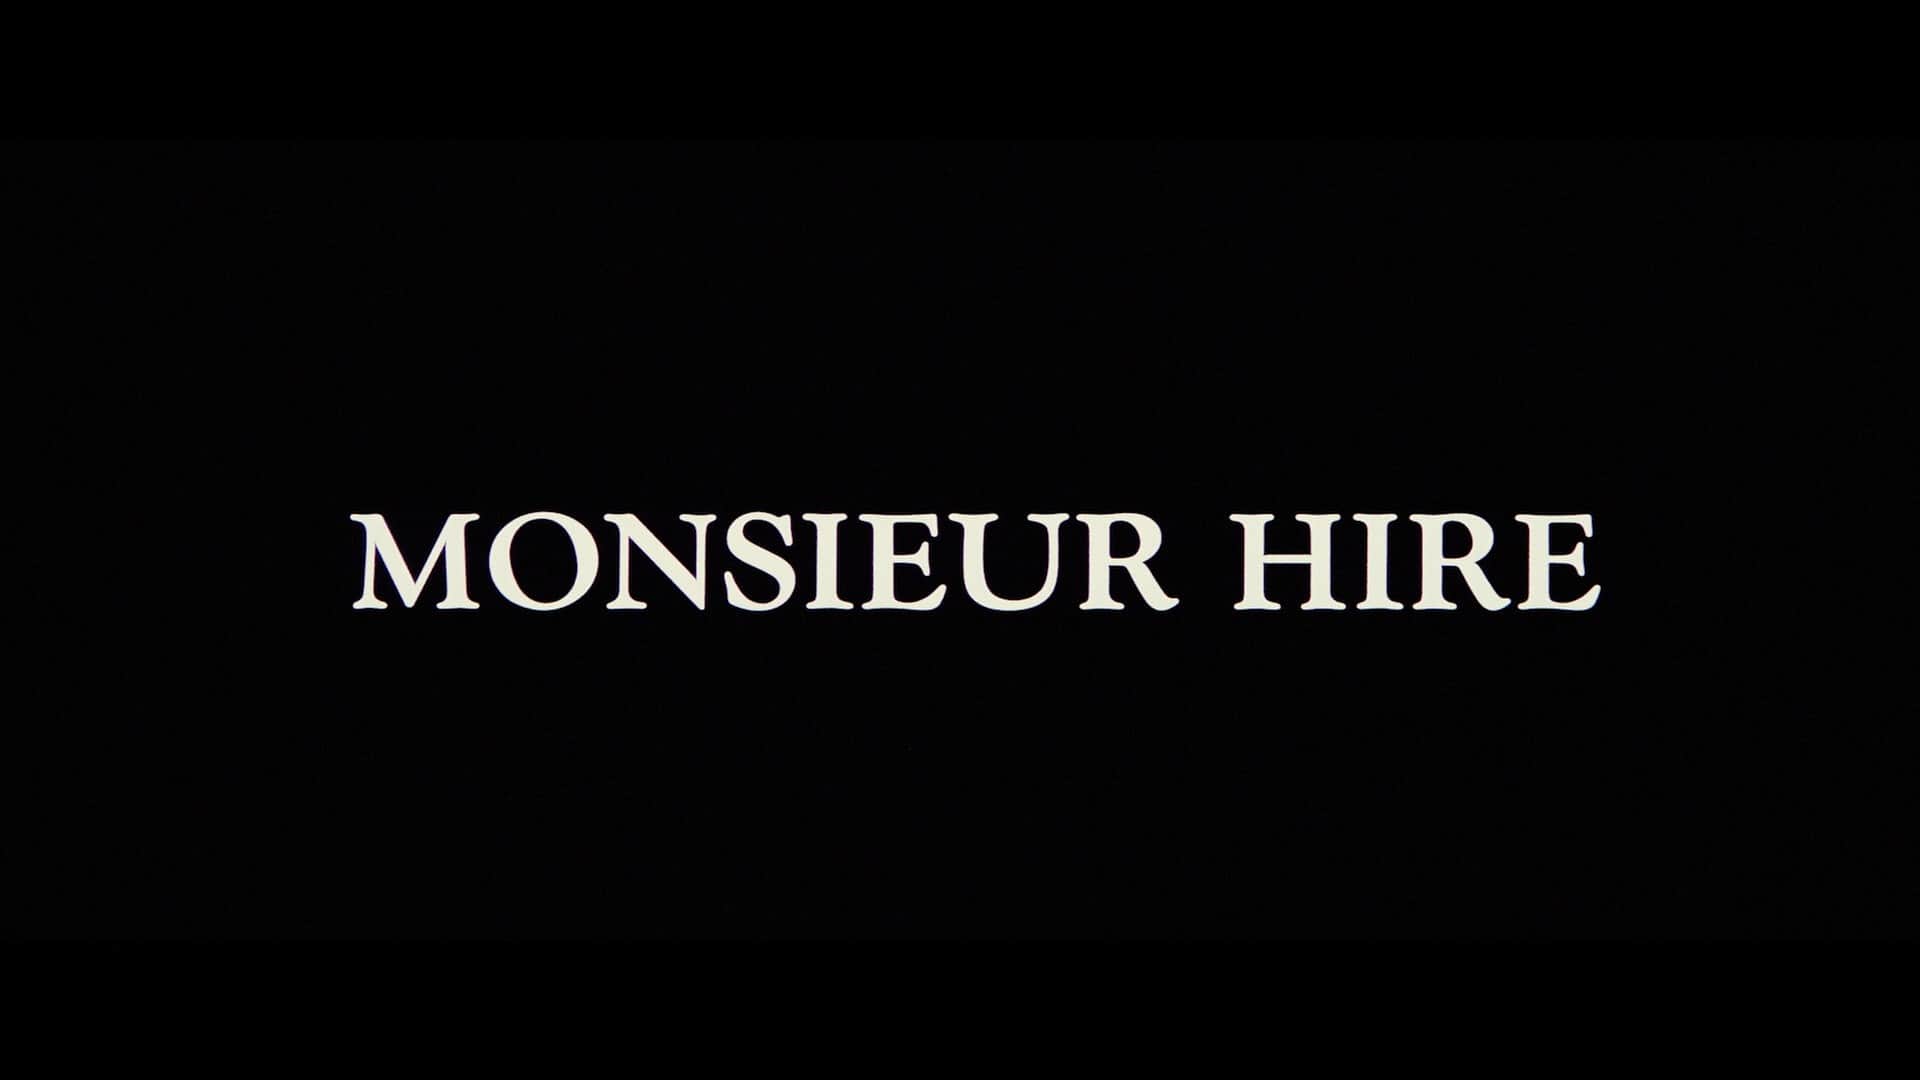 Monsieur Hire (1989) [Cohen Collection Blu-ray review] 74